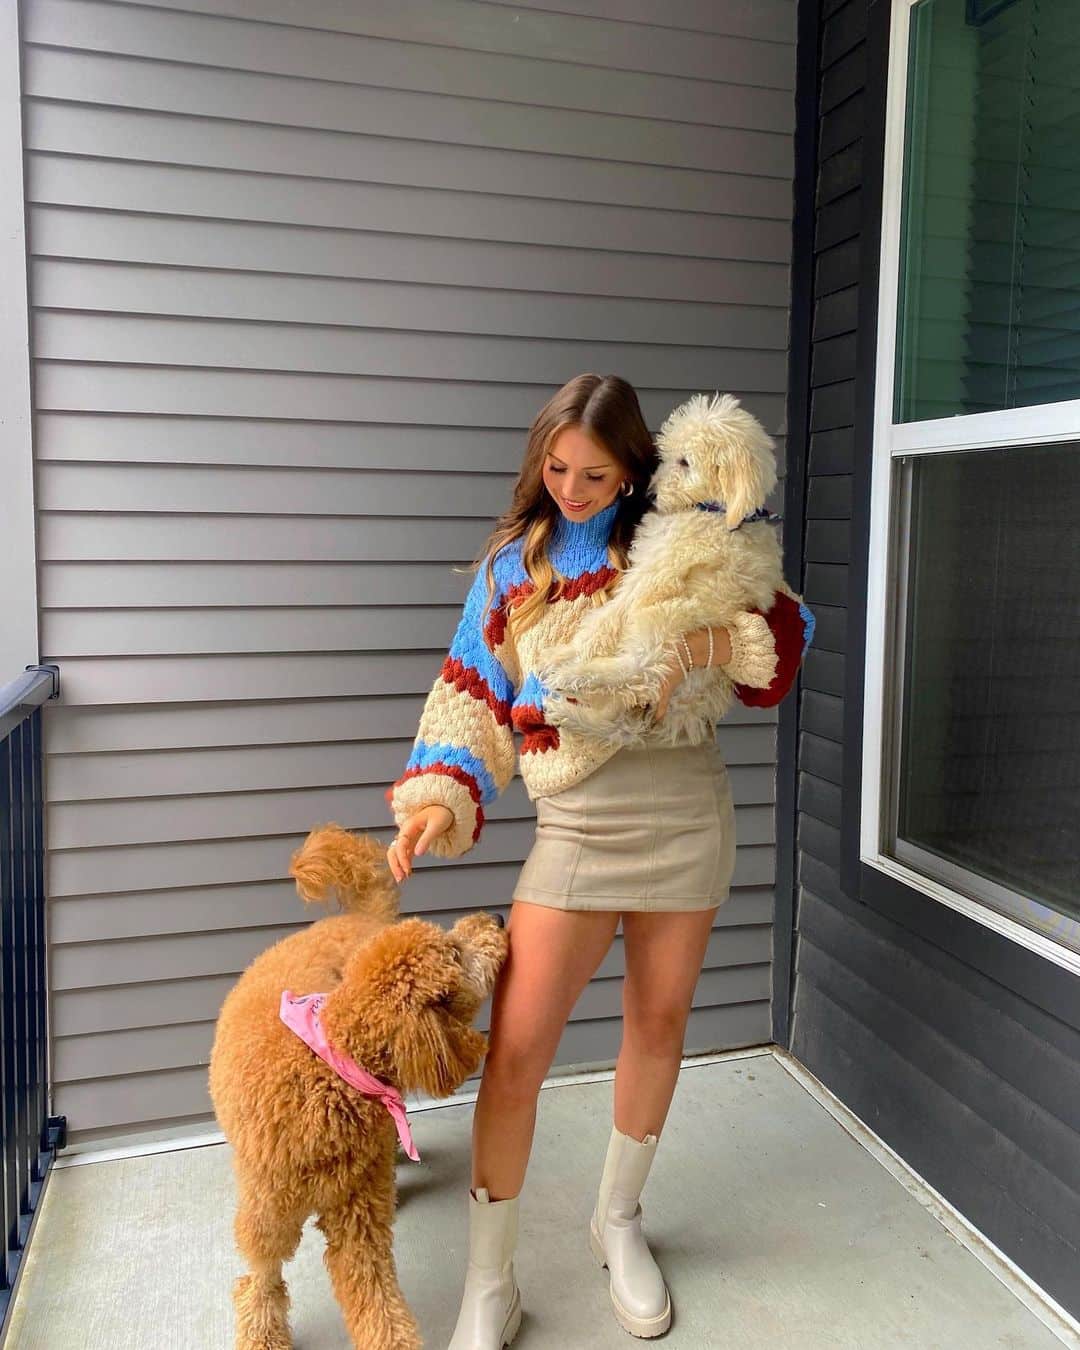 Presleigh Schultz from her Instagram: "Fall days and these pups = the perfect combination 🐾🫶🏼🤎🍂" 